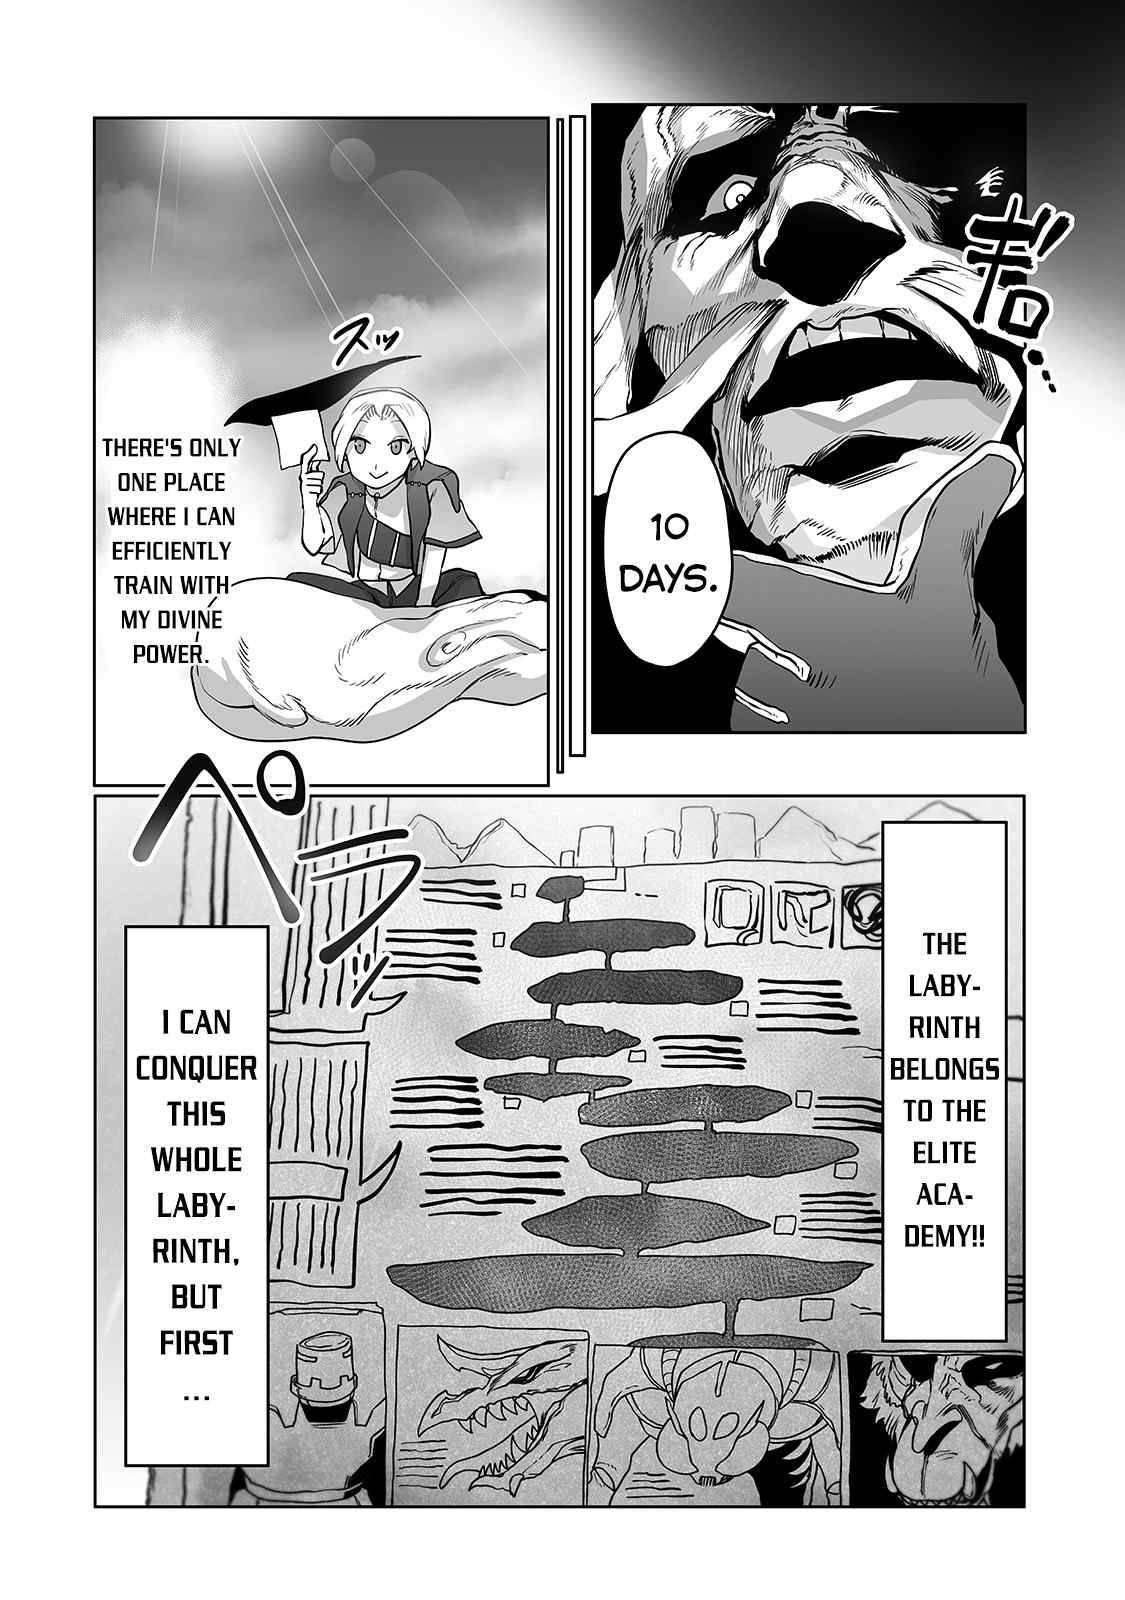 The Useless Tamer Will Turn into the Top Unconsciously by My Previous Life Knowledge - chapter 12 - #3